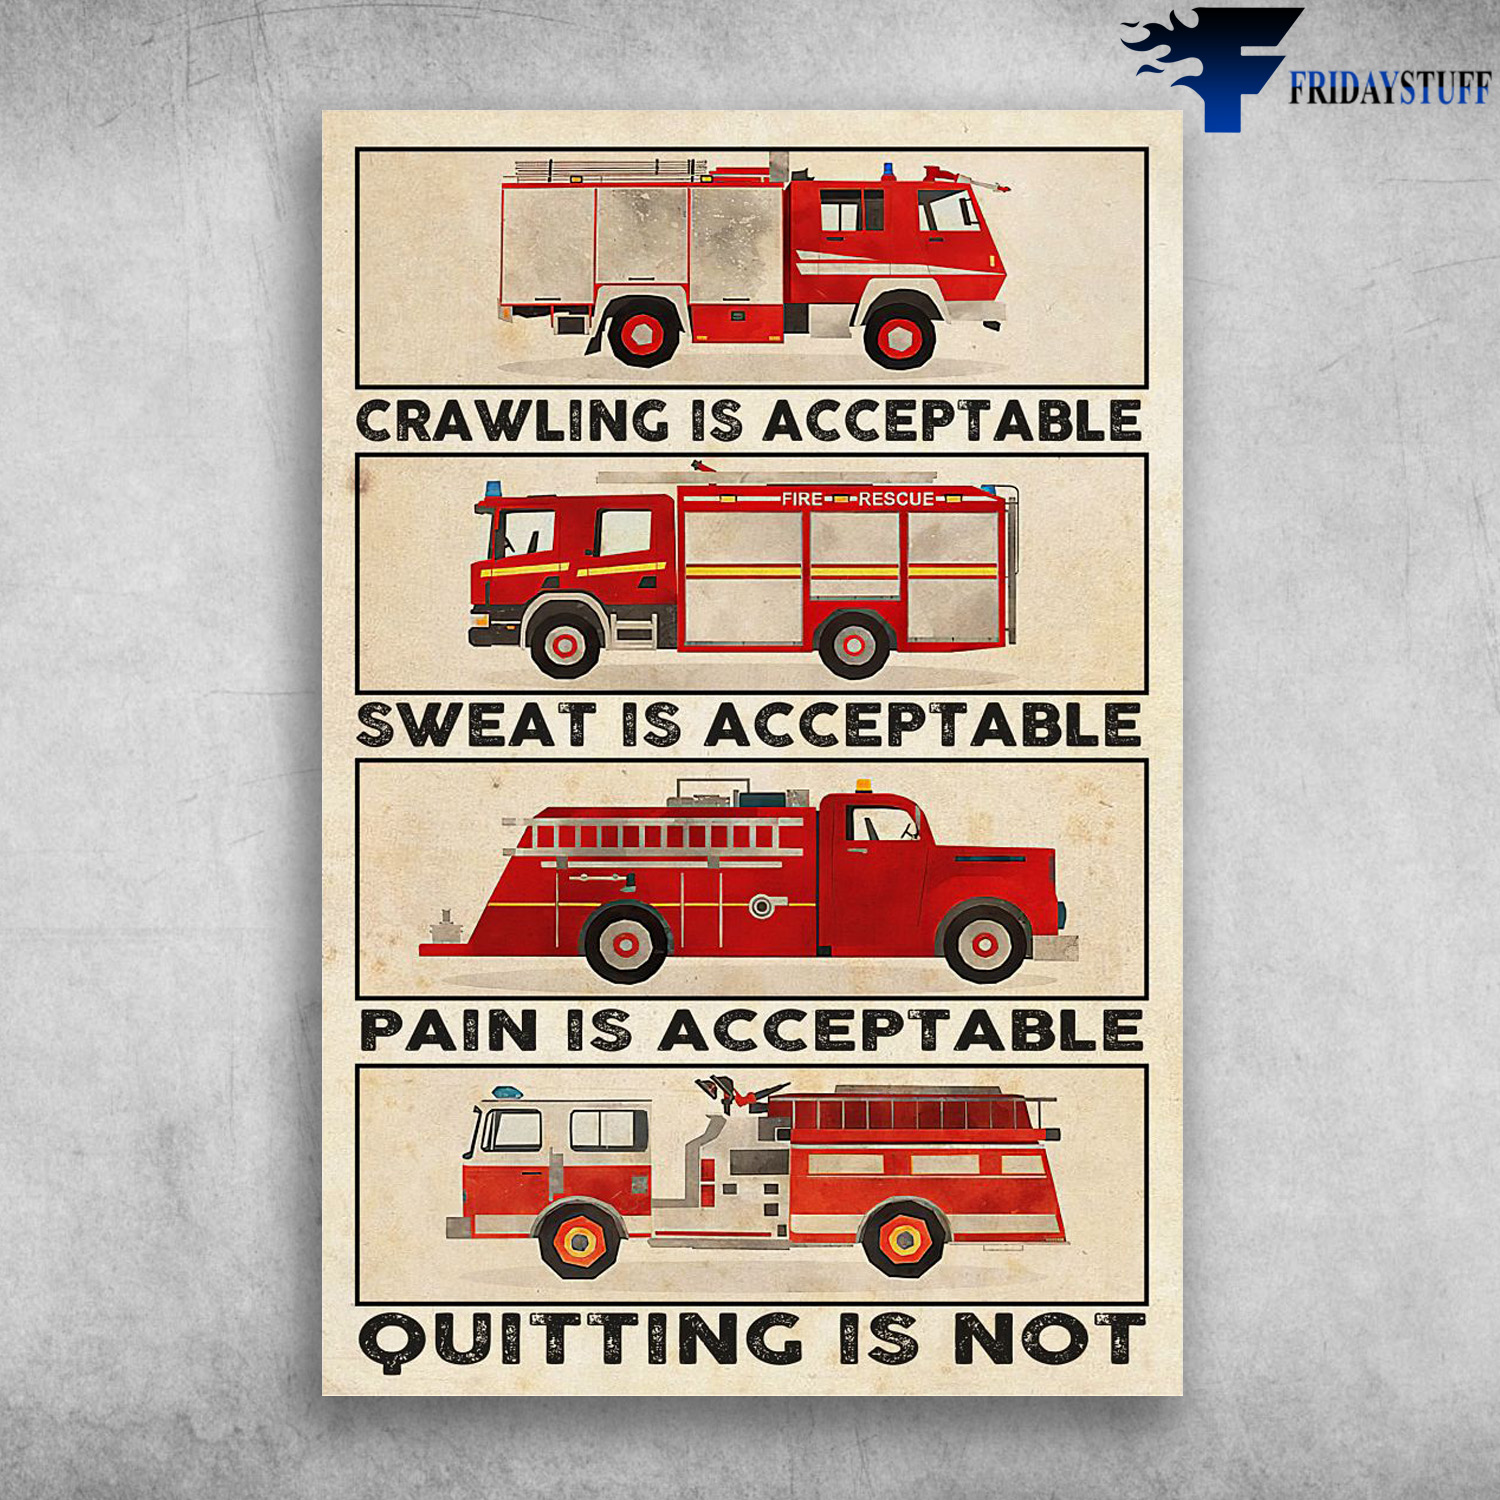 Fire Truck - Crawling Is Acceptable, Sweat Is Acceptable, Pain Is Acceptable, Quitting Is Not